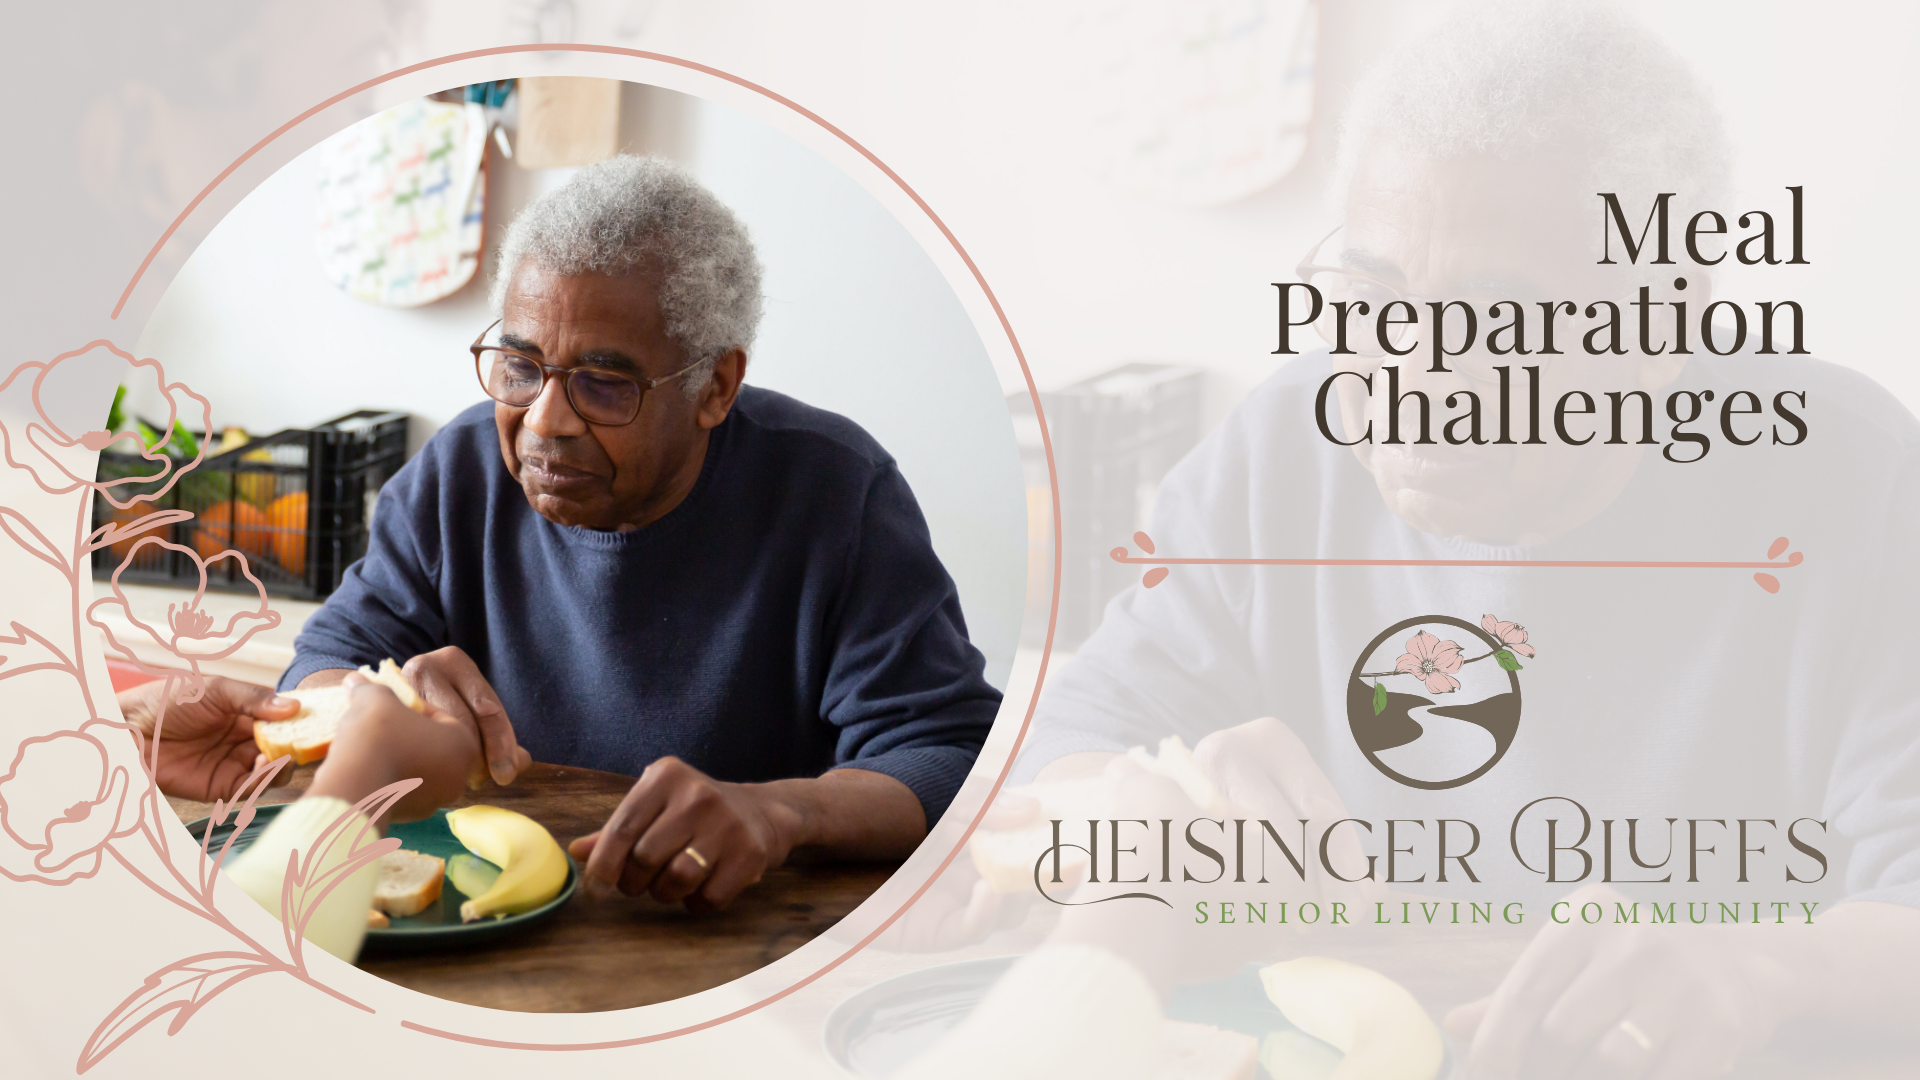 Independent Living communities provide dining services with nutritious and delicious meal options